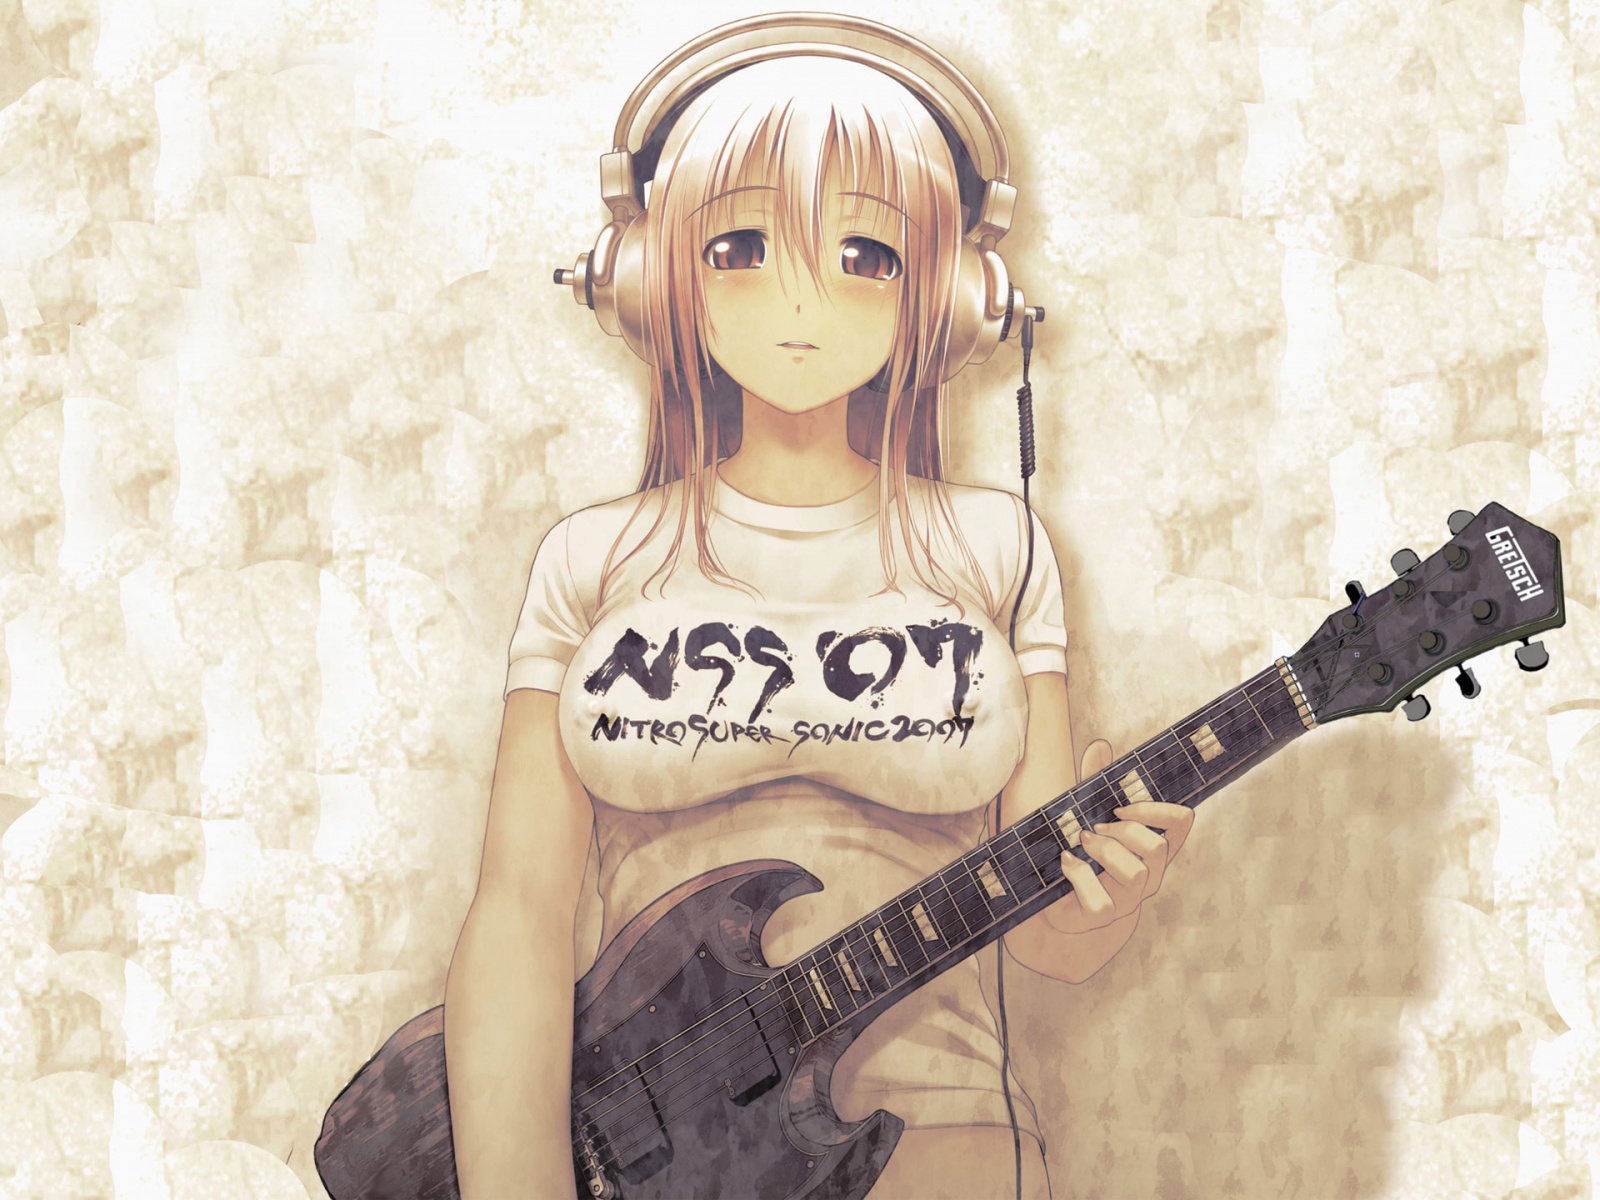 To Download Anime Girl with Guitar wallpaper click on full size and